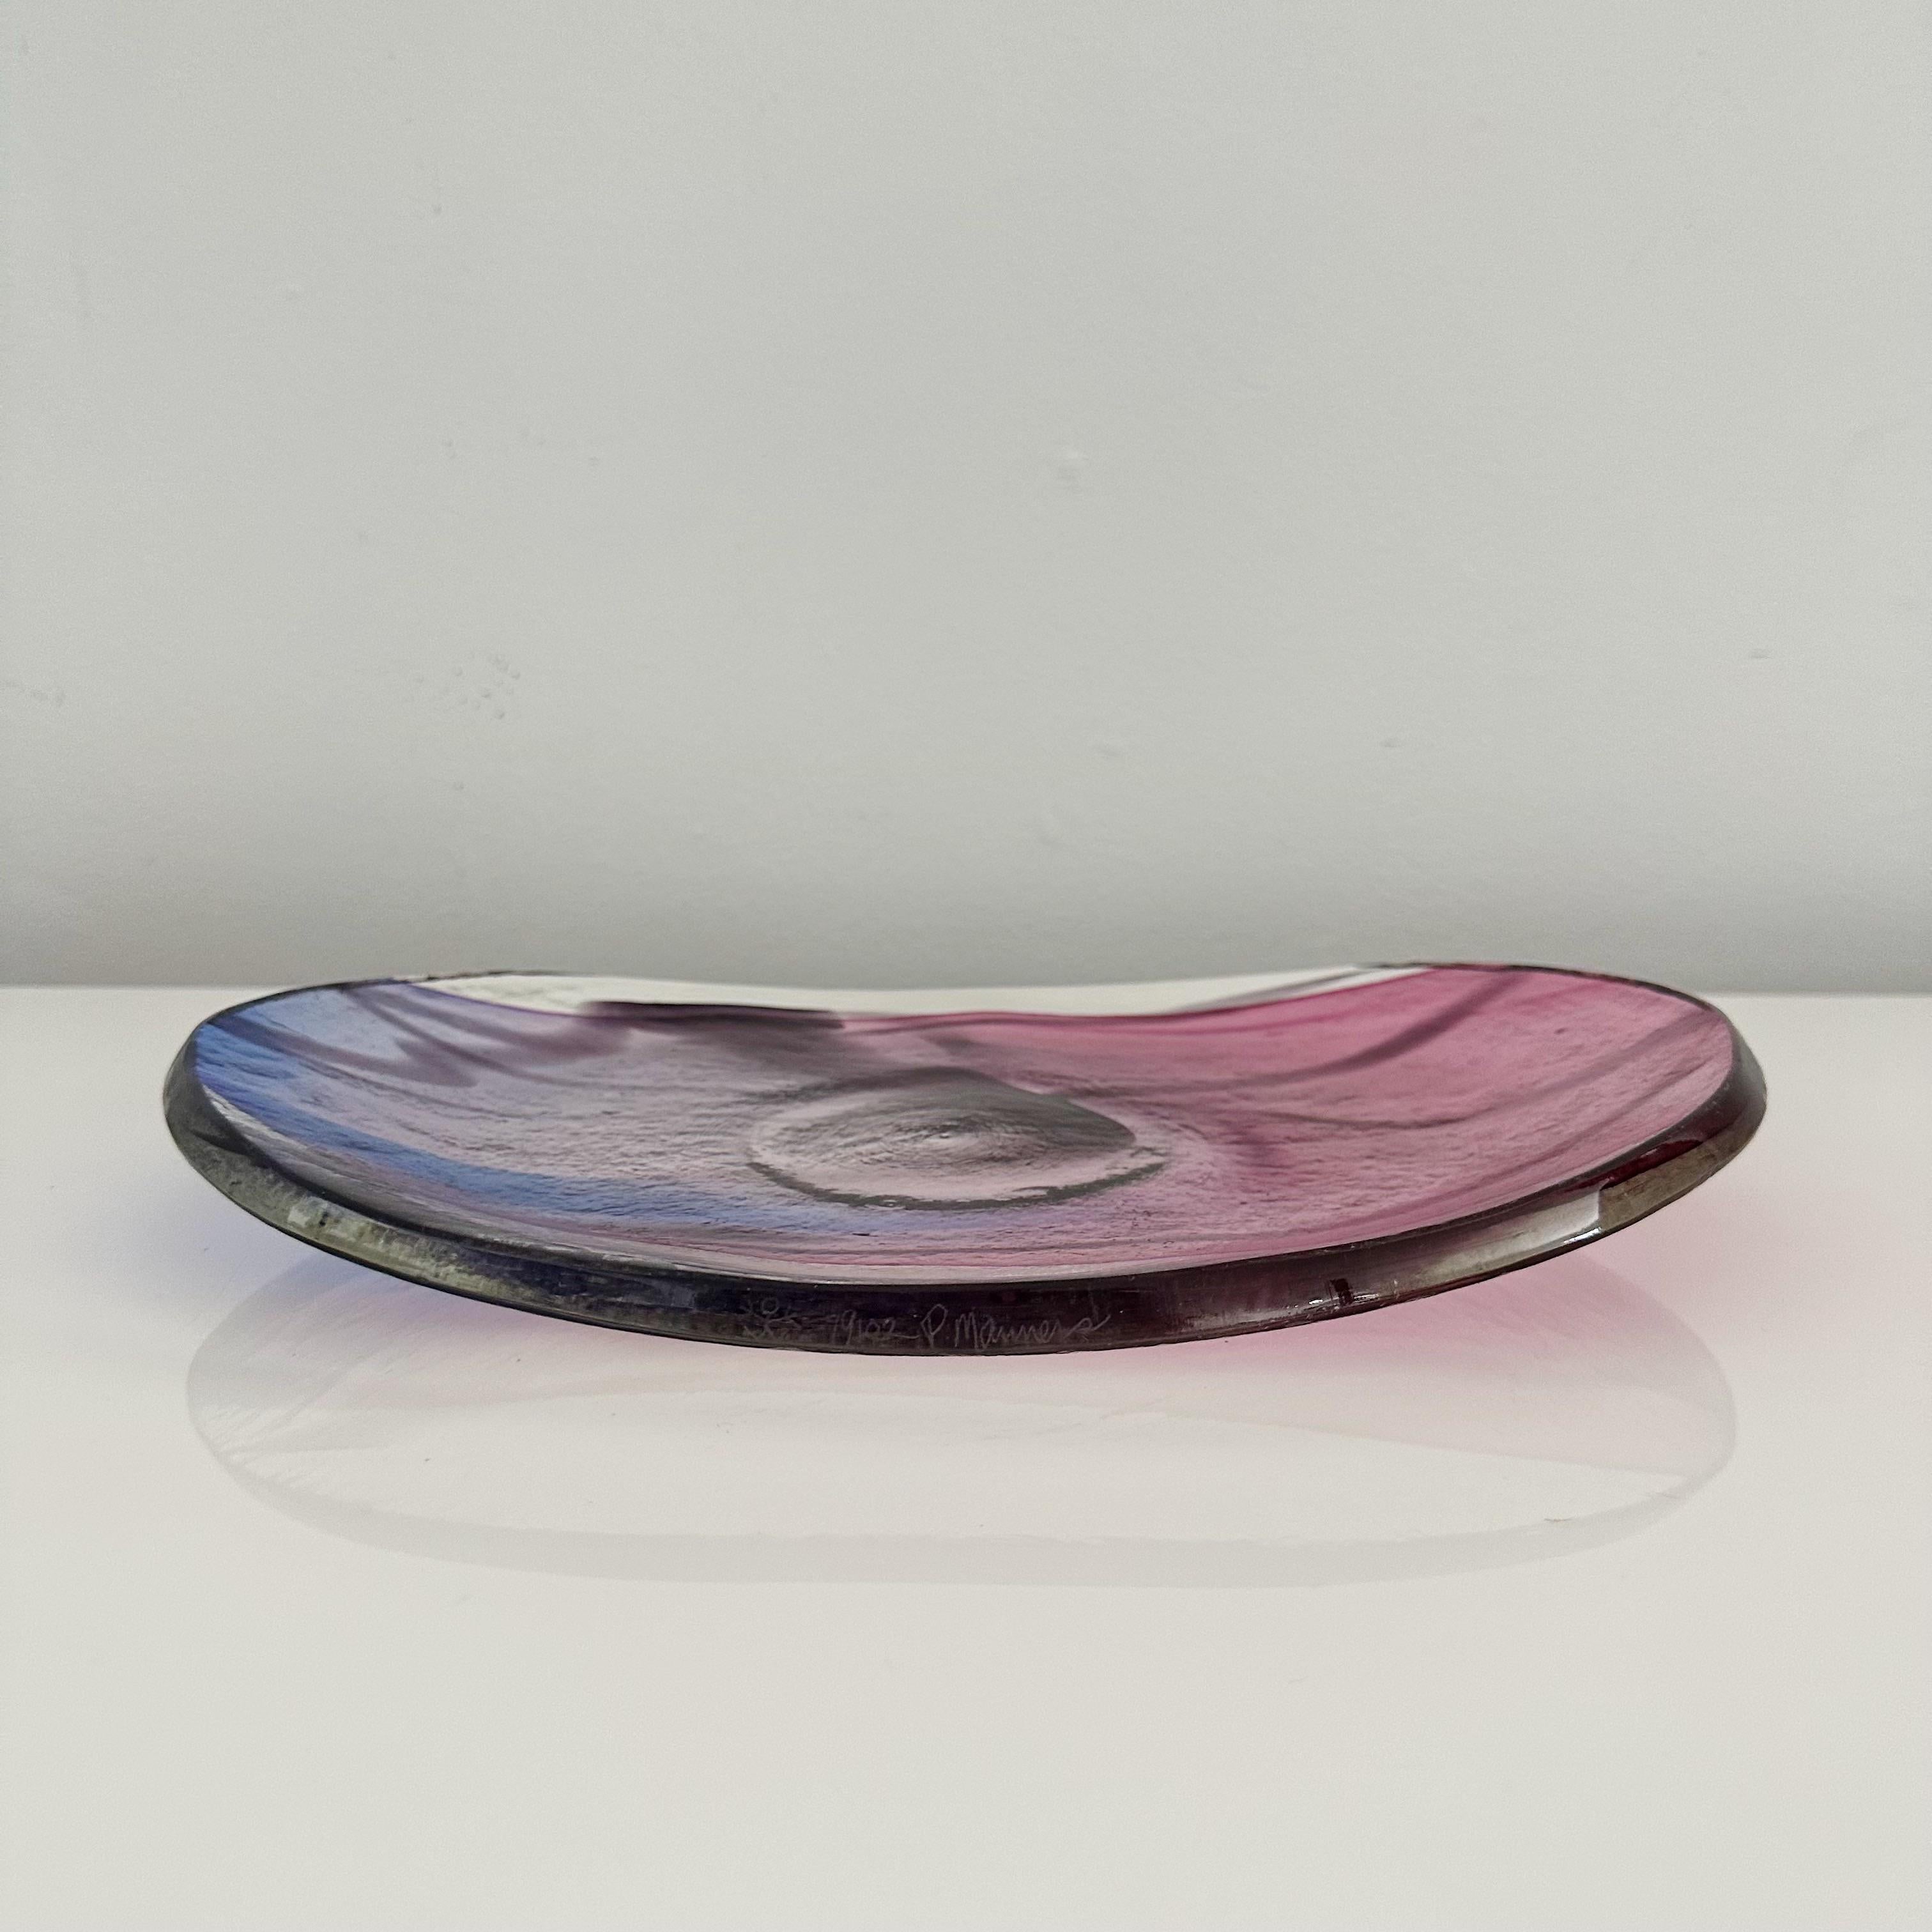 Hand-Blown Art Glass Sculptural plate by Paul Manners (United States, born 1946) Stickman Studios. Signed to the base Numbered 7910. Freeform sculptural plate centerpiece in transparent, purple and blue tones. signed and numbered P Manners with